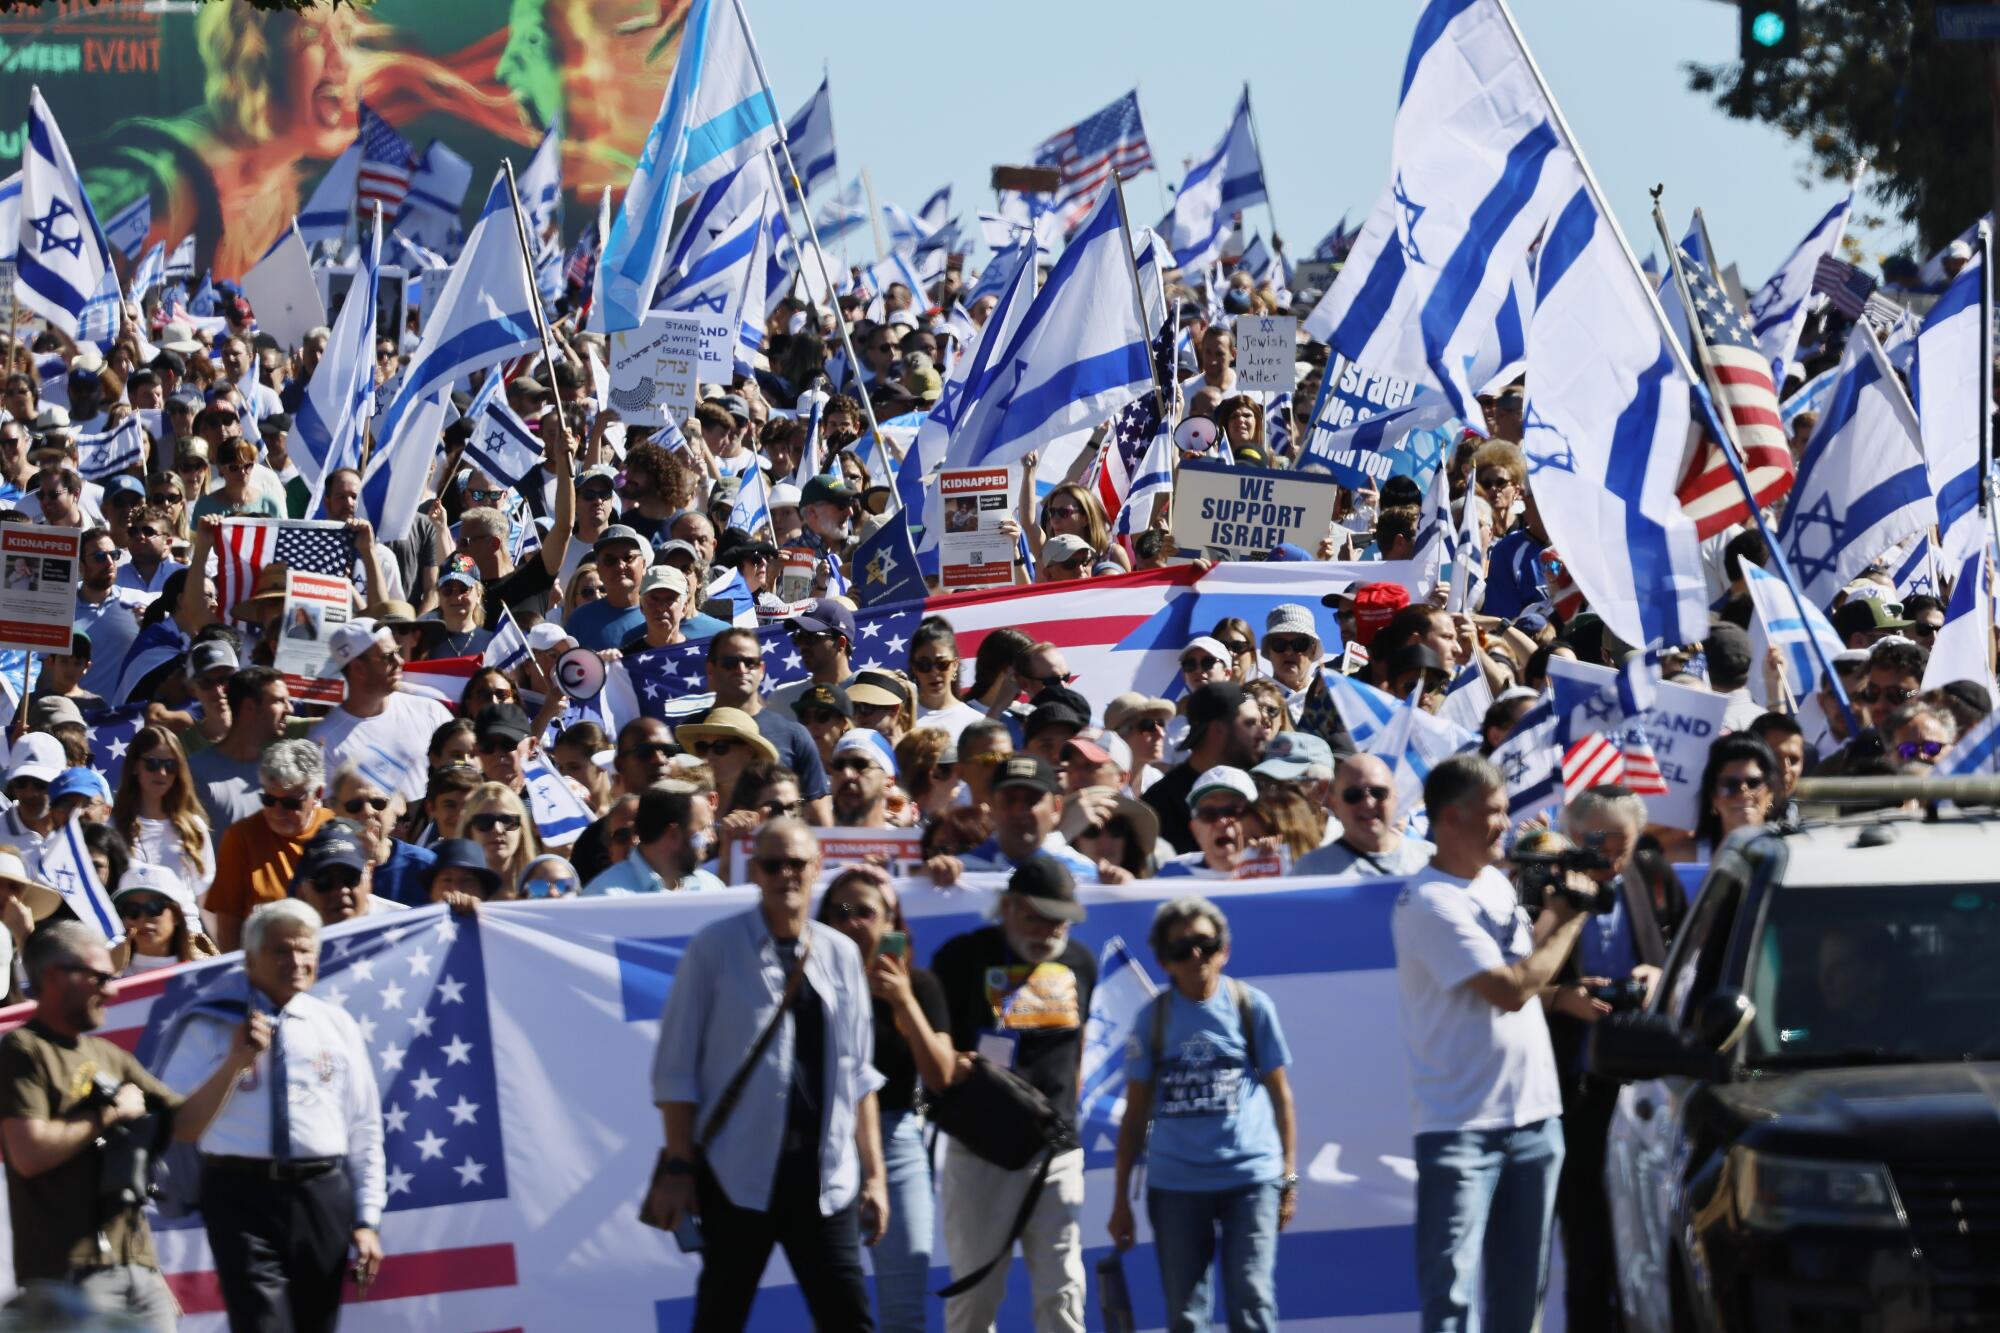 A large crowd waving blue-and-white flags and the U.S. flag 